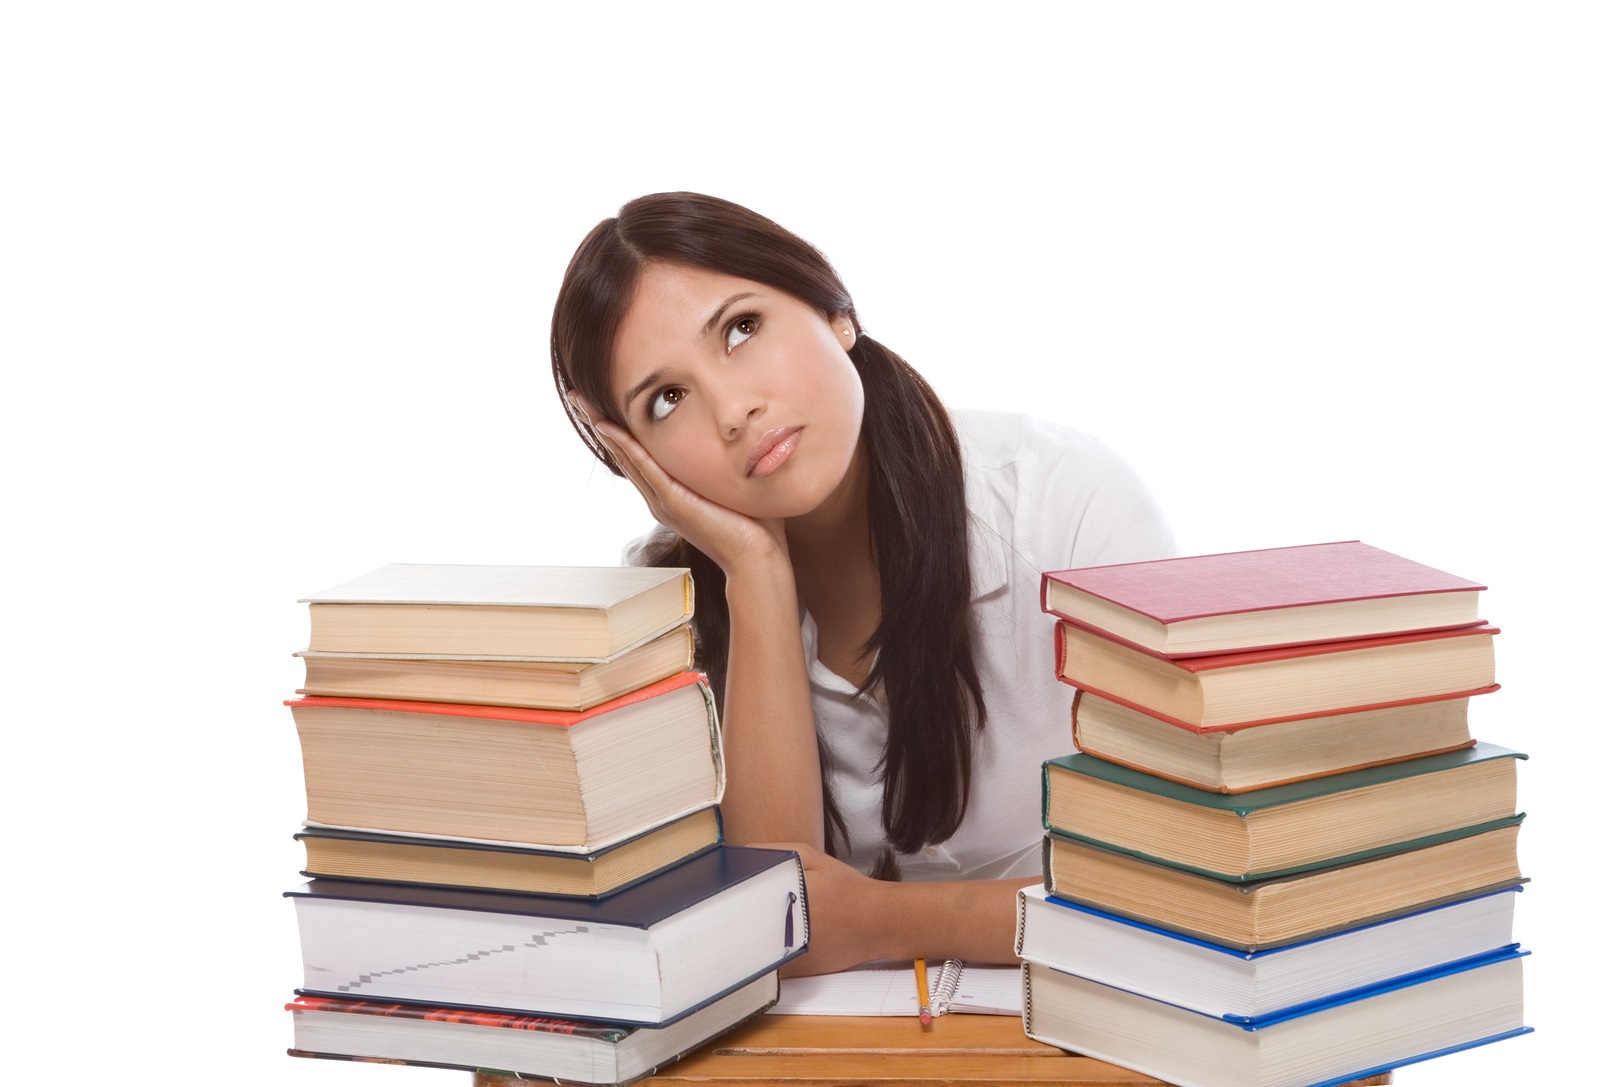 Use our dumps to ace your 350-401 exam